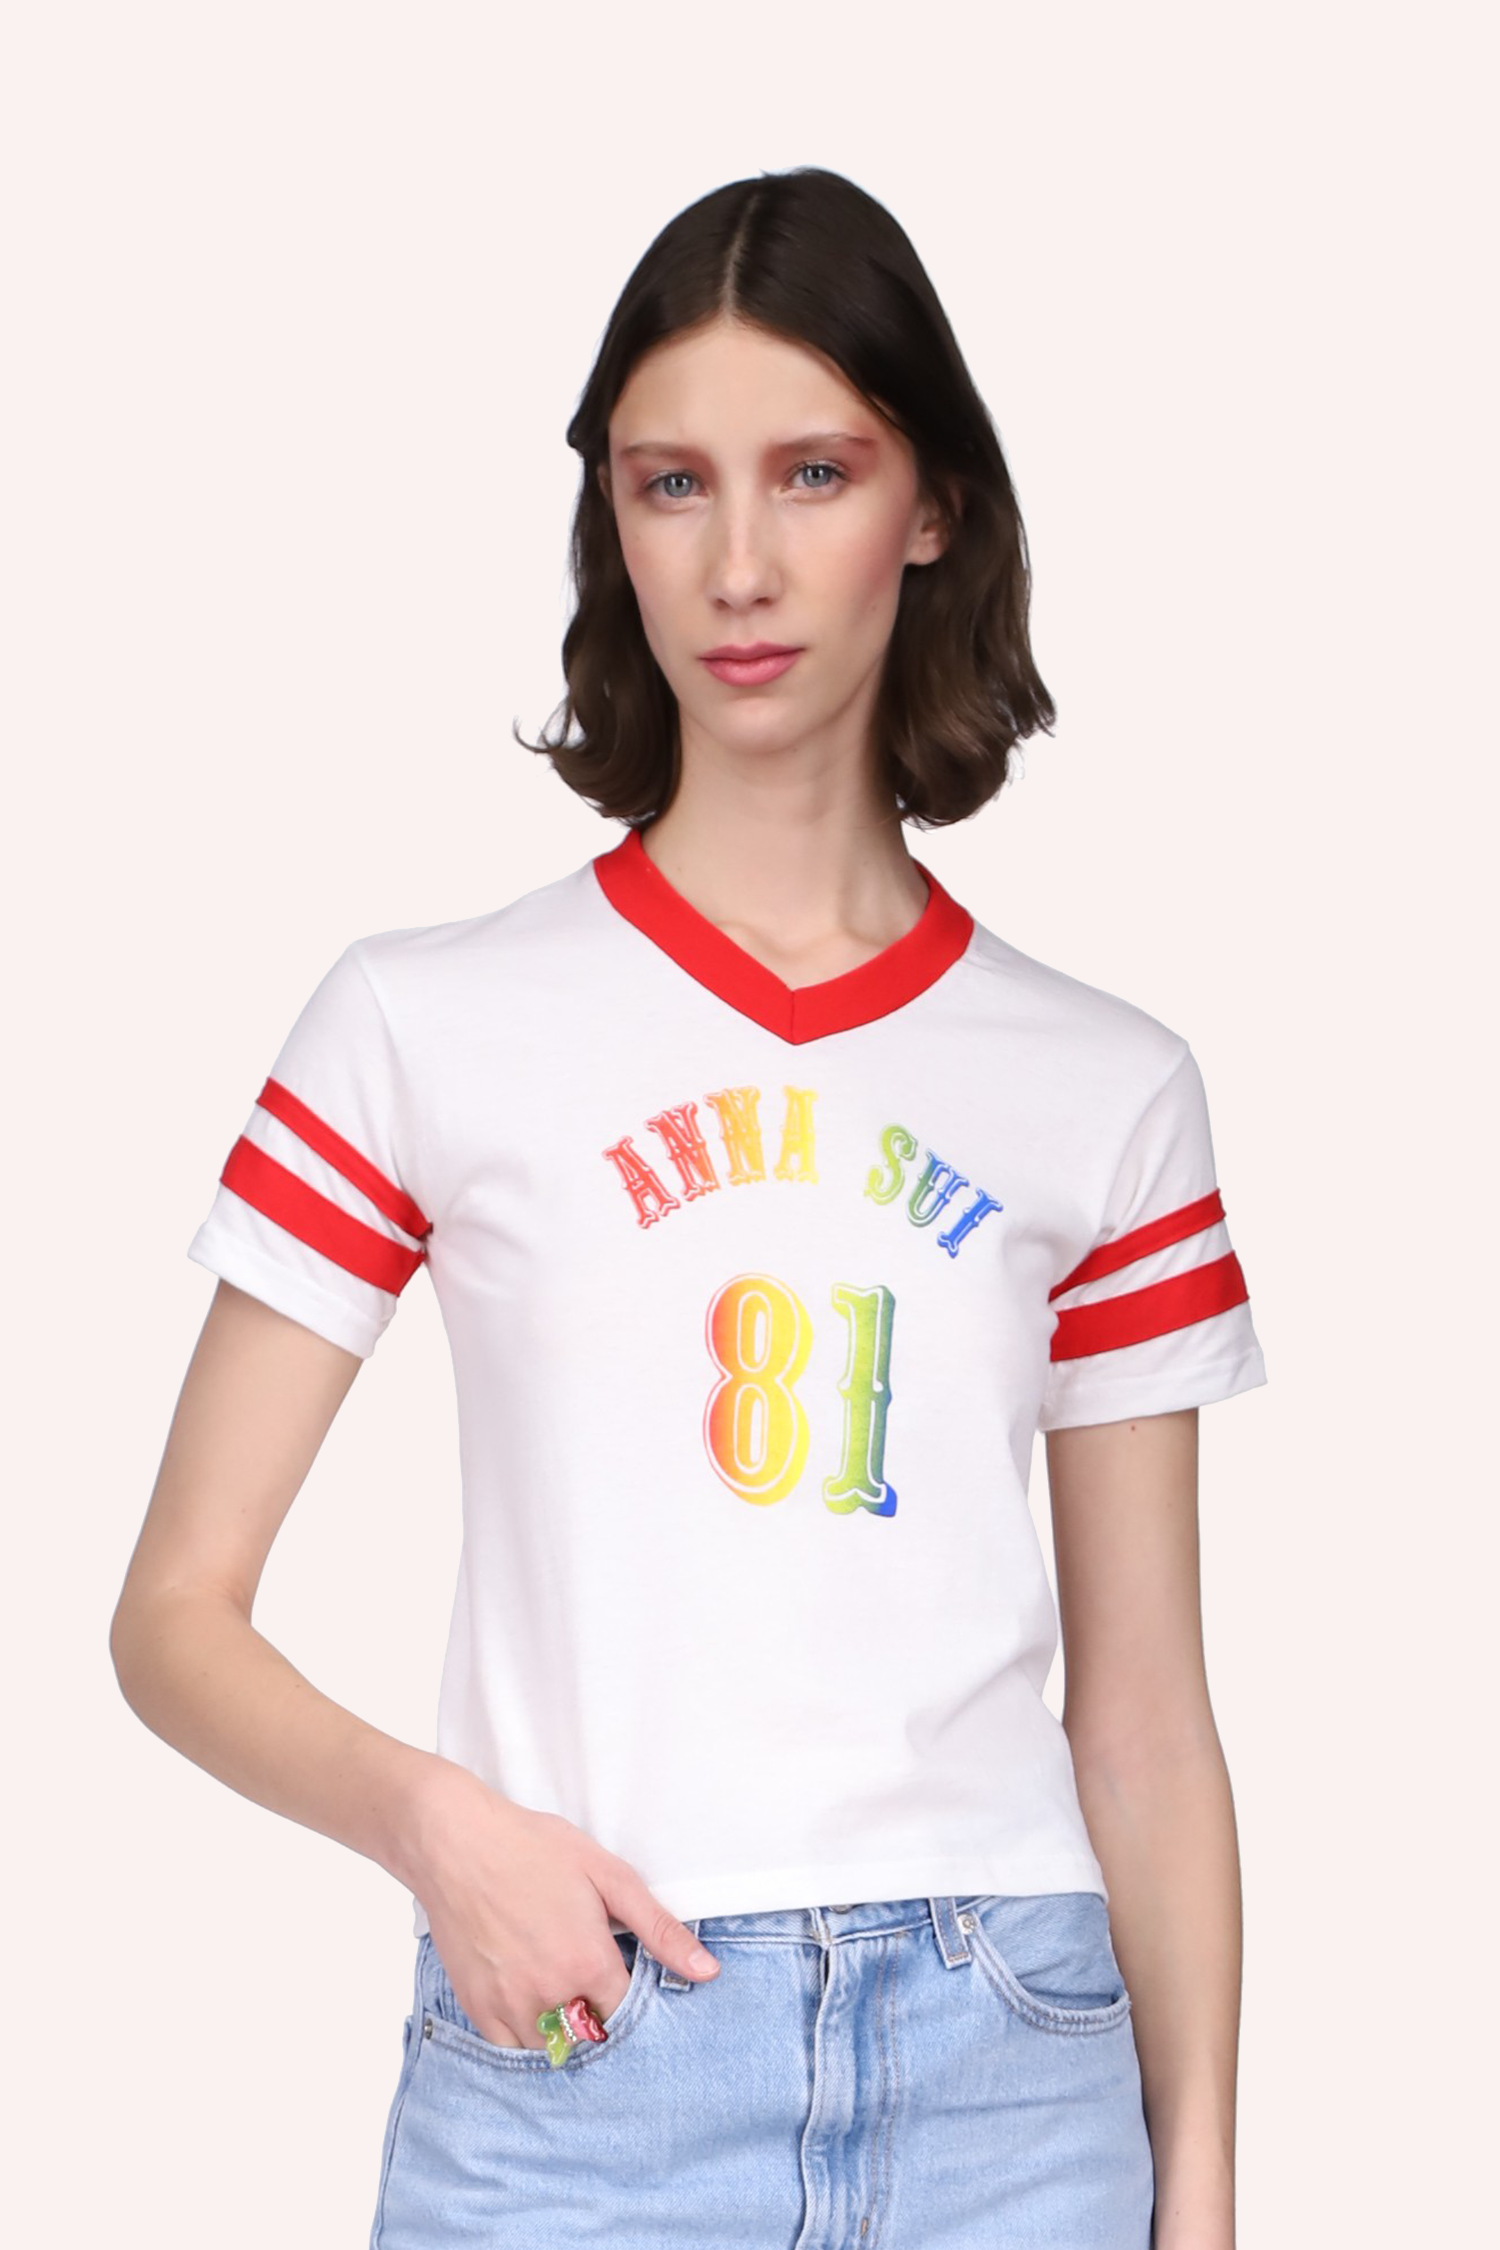 White Tee with short sleeves, a red band on the V-collar, 2 on arms, front print Anna Sui and 81 in rainbow color